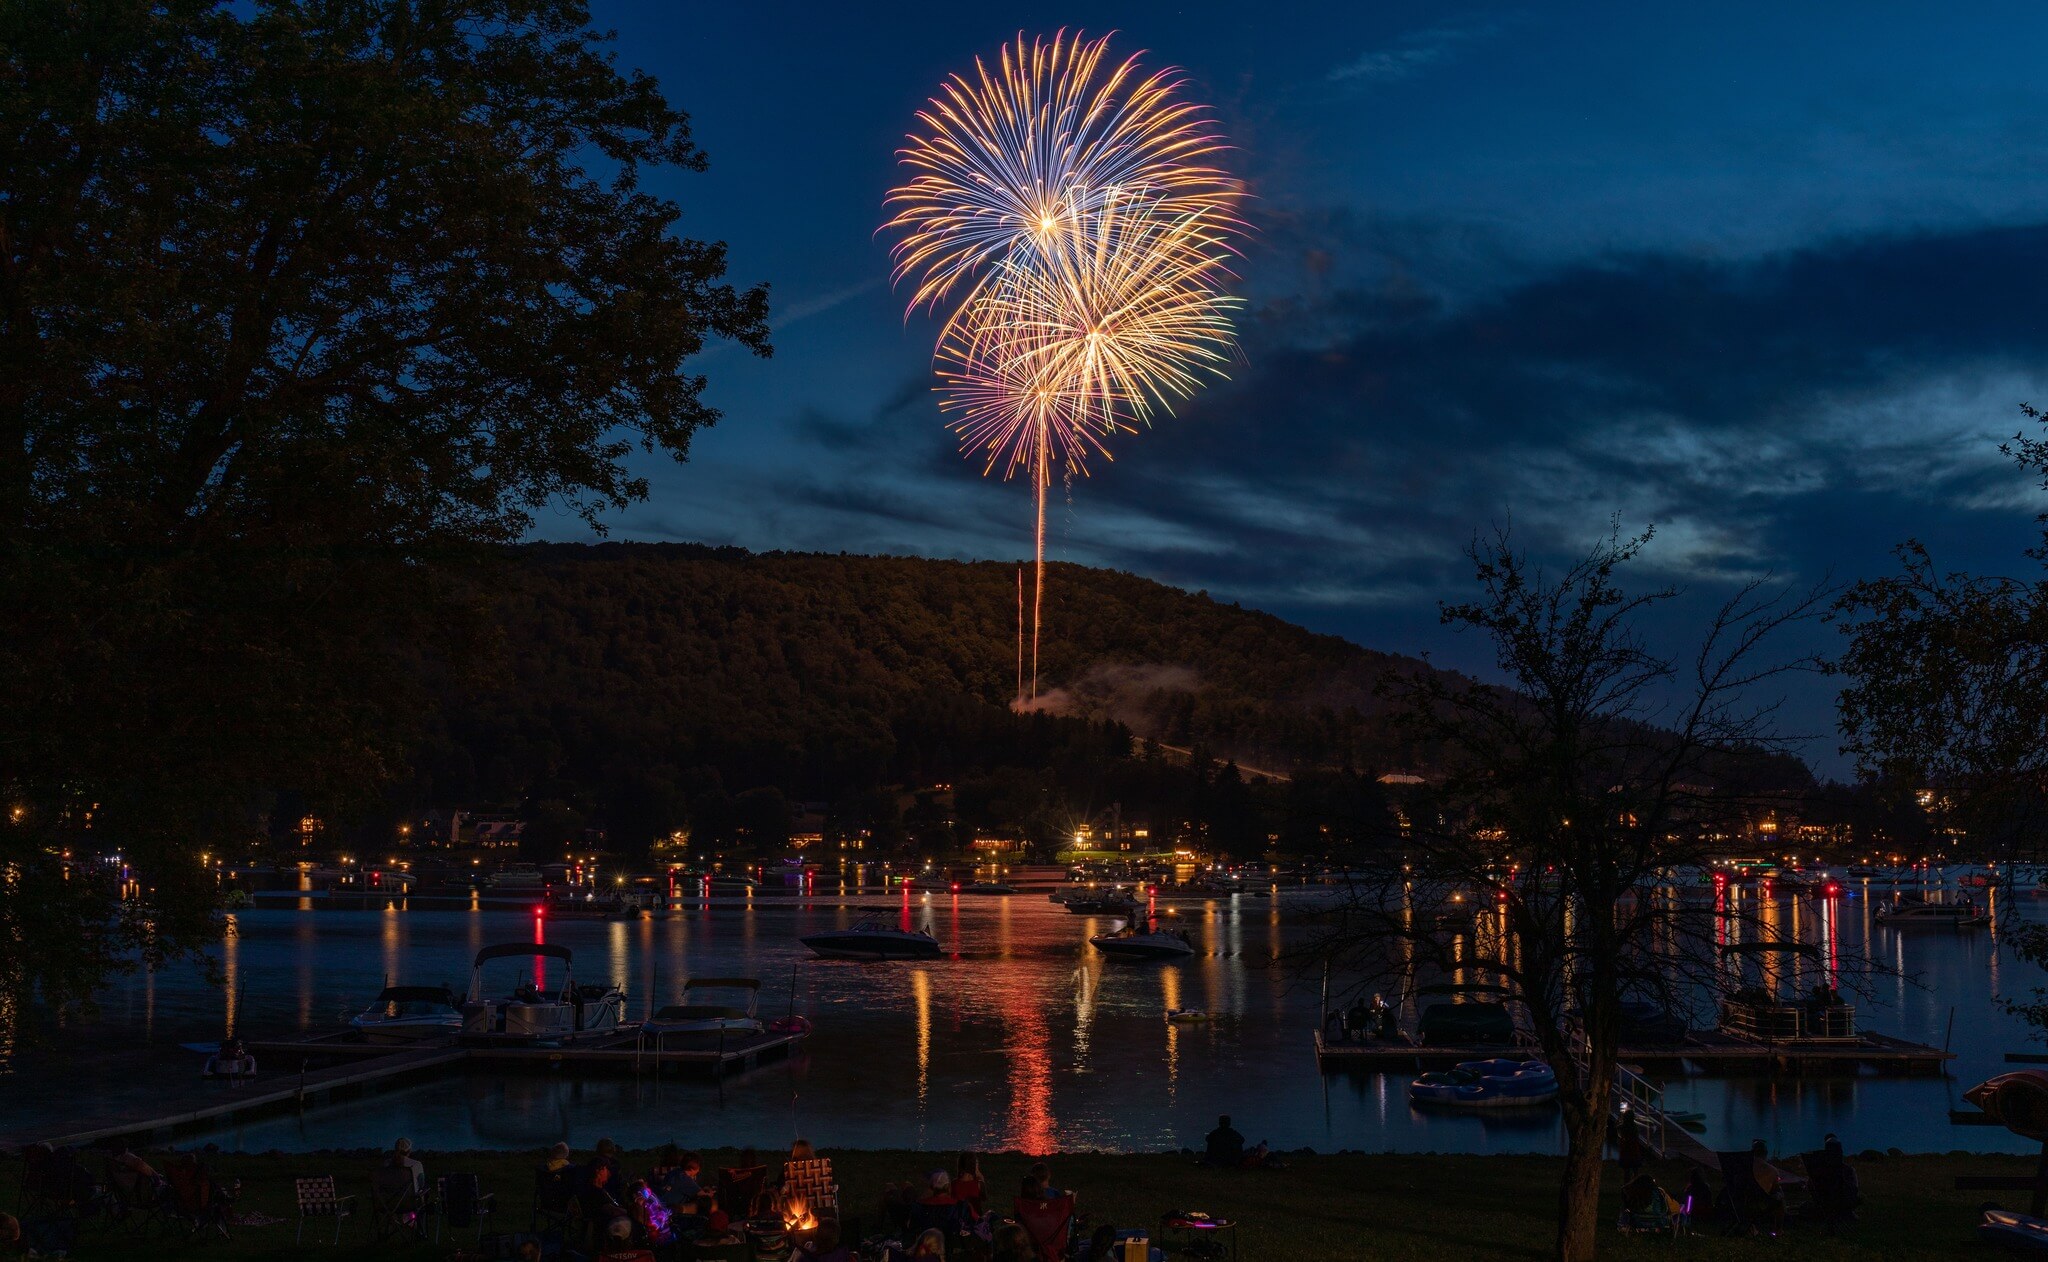 July 4th Fireworks presented by the Garrett County Chamber at Deep Creek Lake, MD